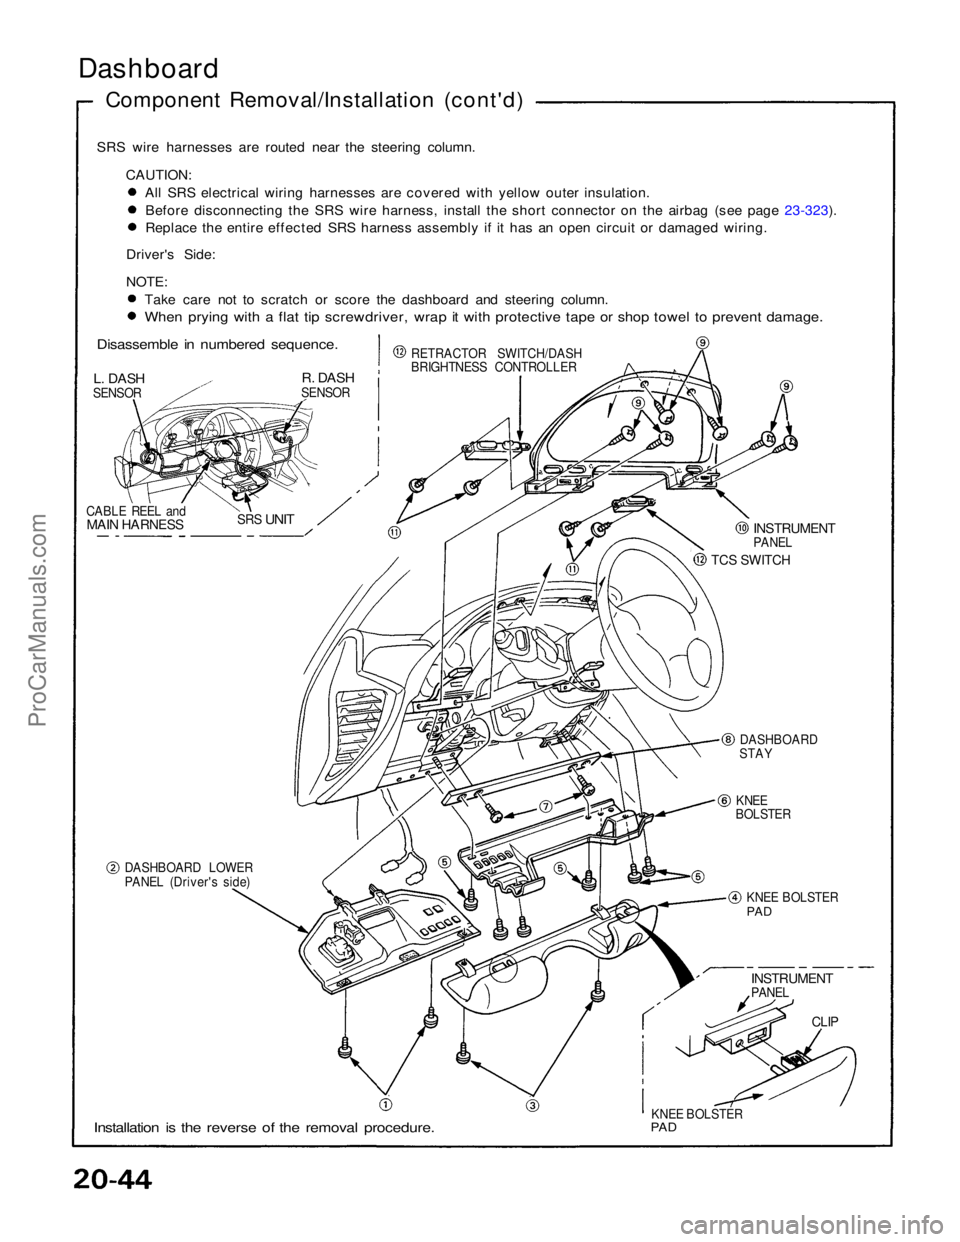 ACURA NSX 1991  Service Repair Manual 
Dashboard

Component Removal/Installation (cont'd)
SRS wire harnesses are routed near the steering column. CAUTION: All SRS electrical wiring harnesses are covered with yellow outer insulation.
B